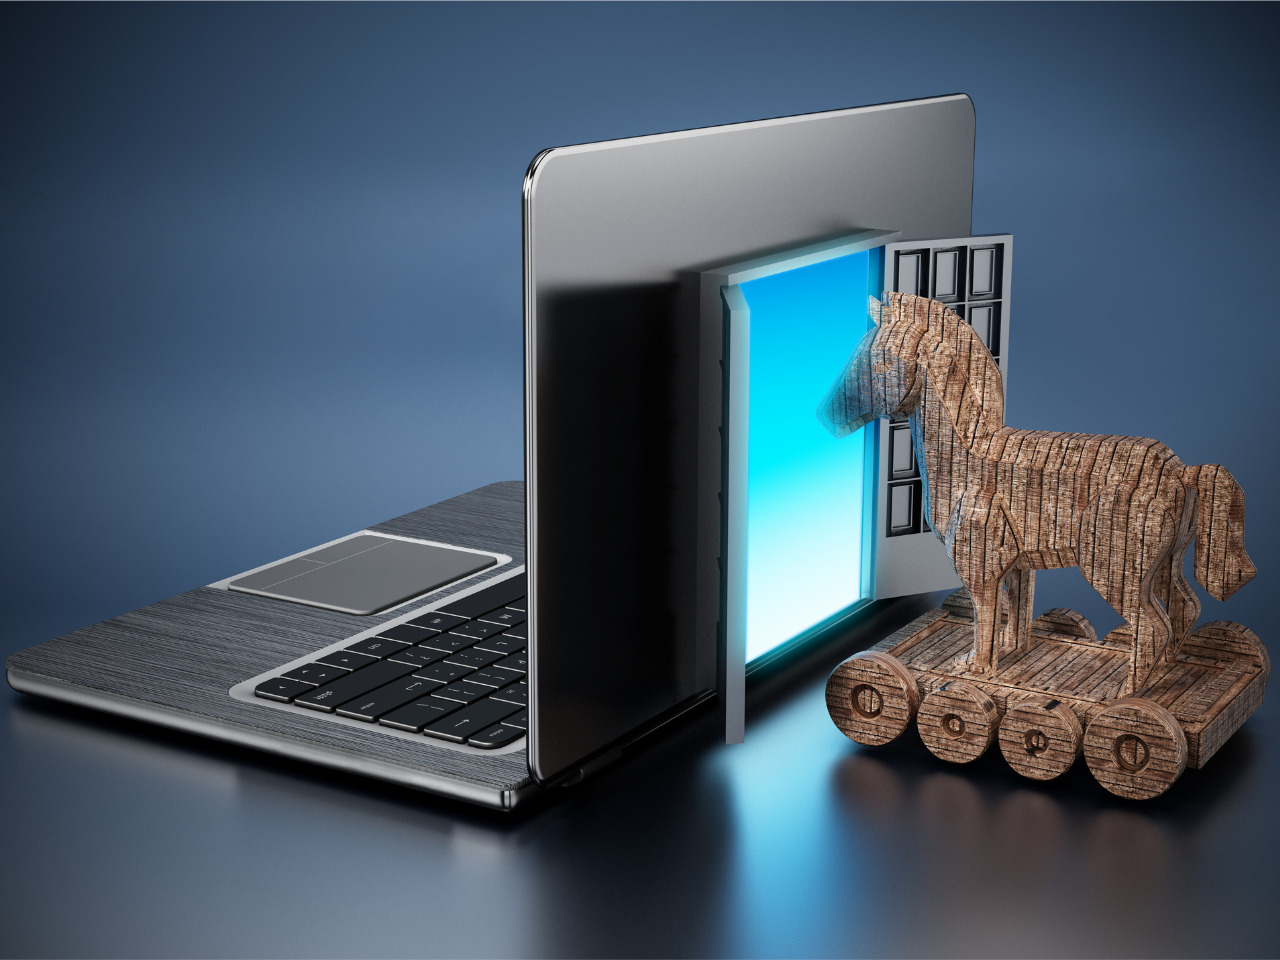 BestSmmPanel Computer Maintenance Is Important For A Healthy Computer trojan horse entering door on laptop computer picture id900552810